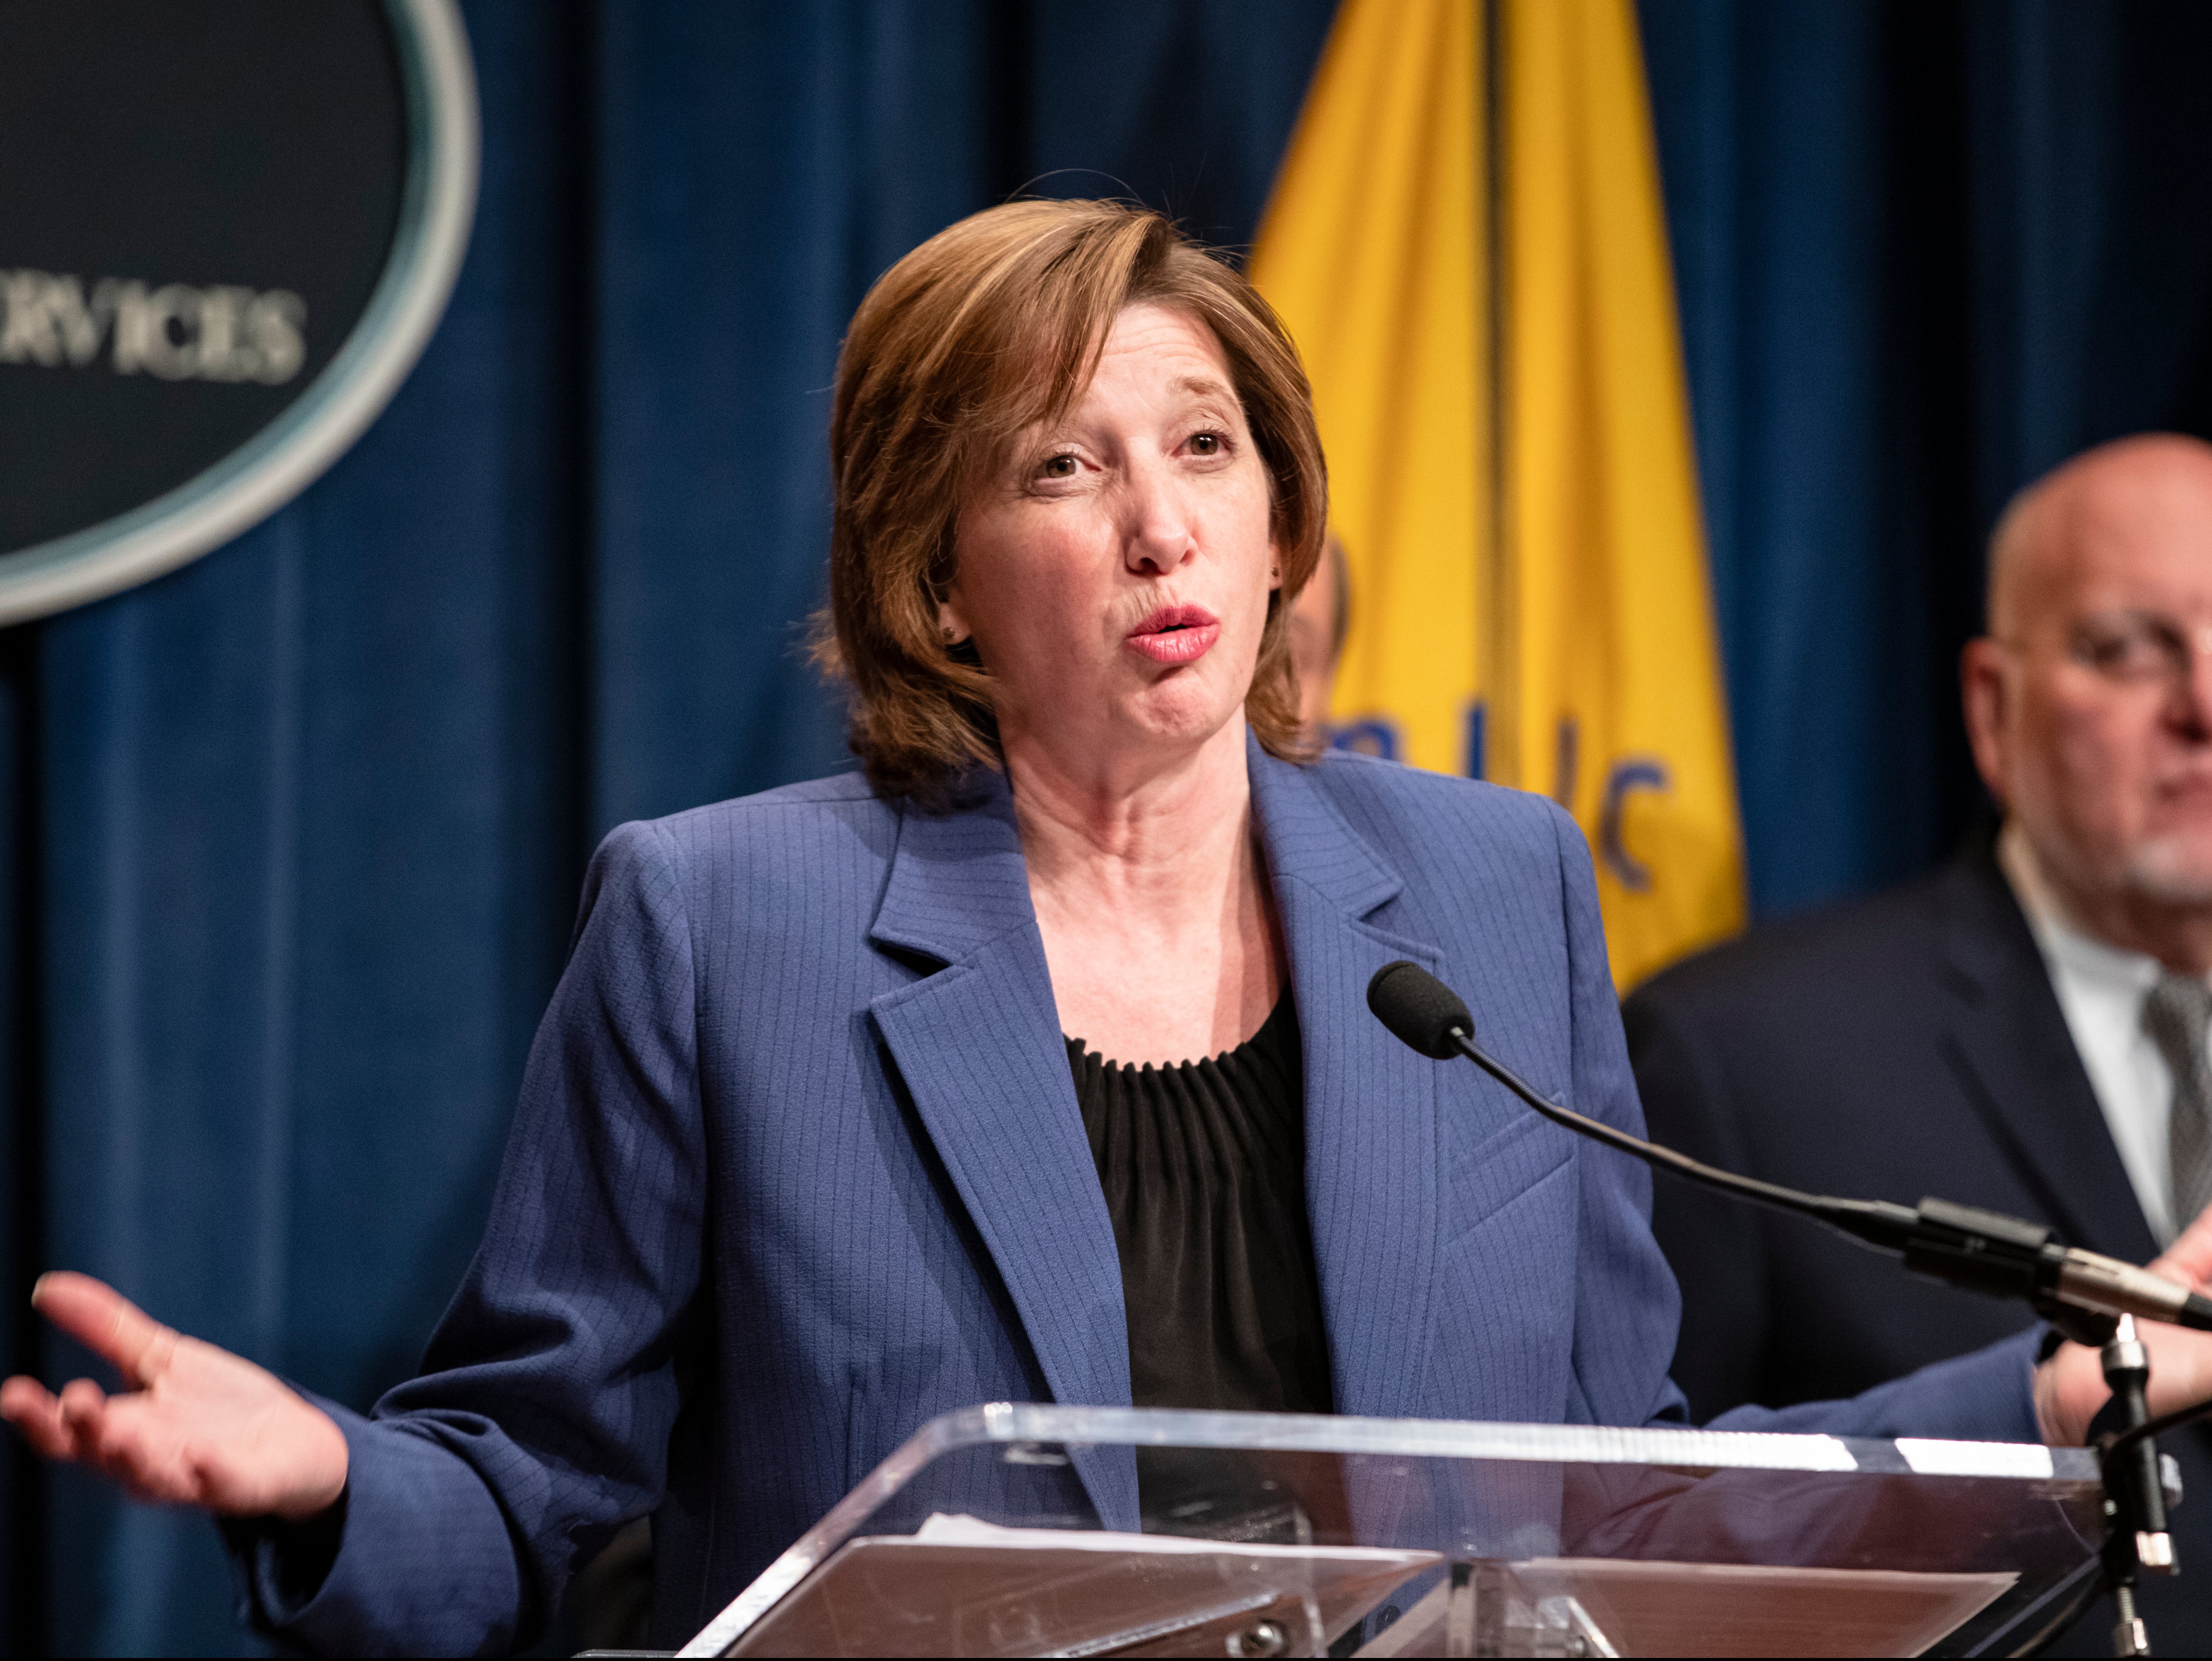 National Center for Immunization and Respiratory Diseases Director Nancy Messonnier speaks during a press conference today at the Department of Health and Human Services